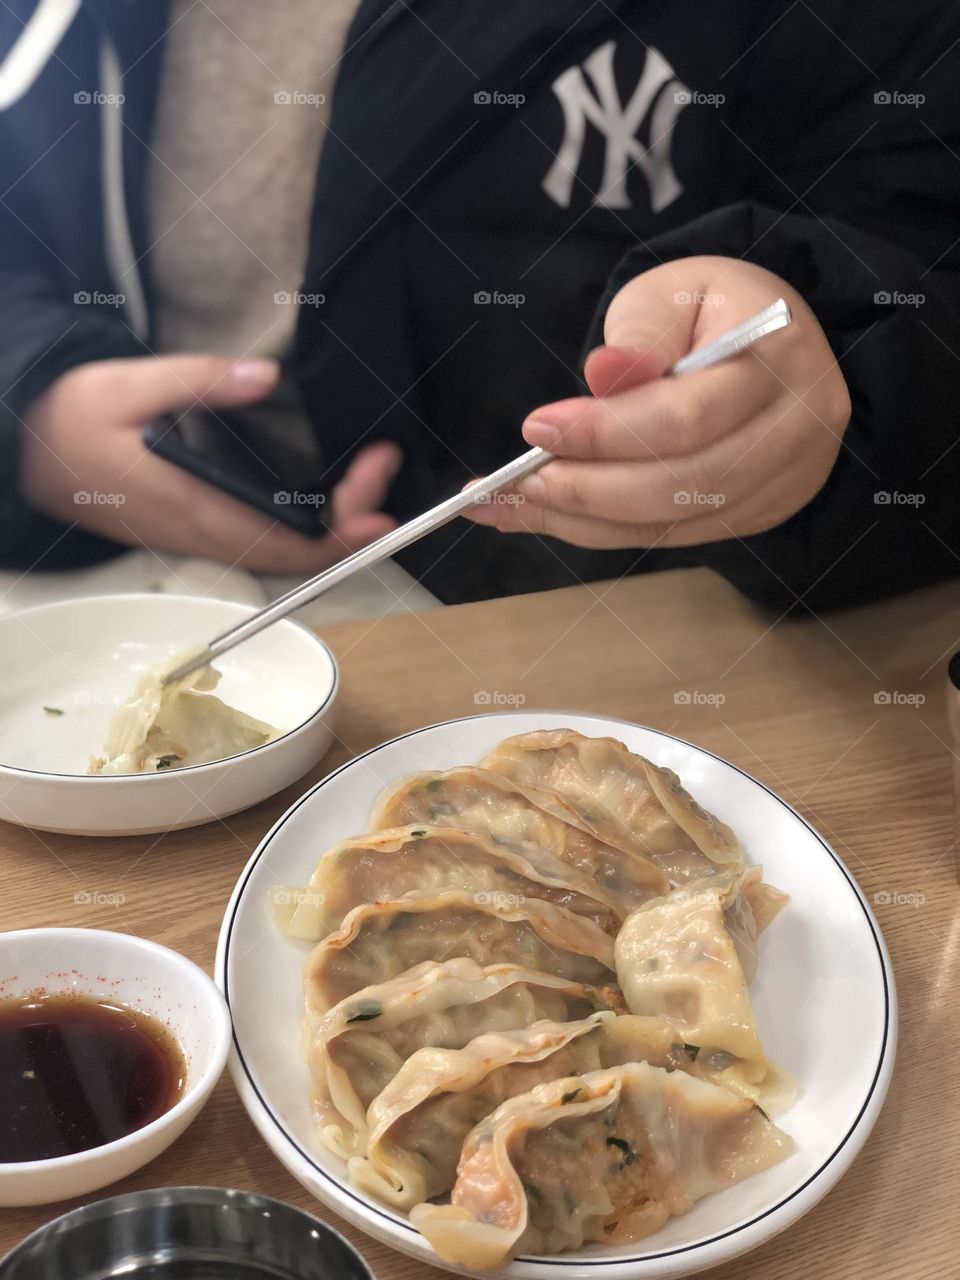 Hand holding phone and picking dumpling up with chopsticks 